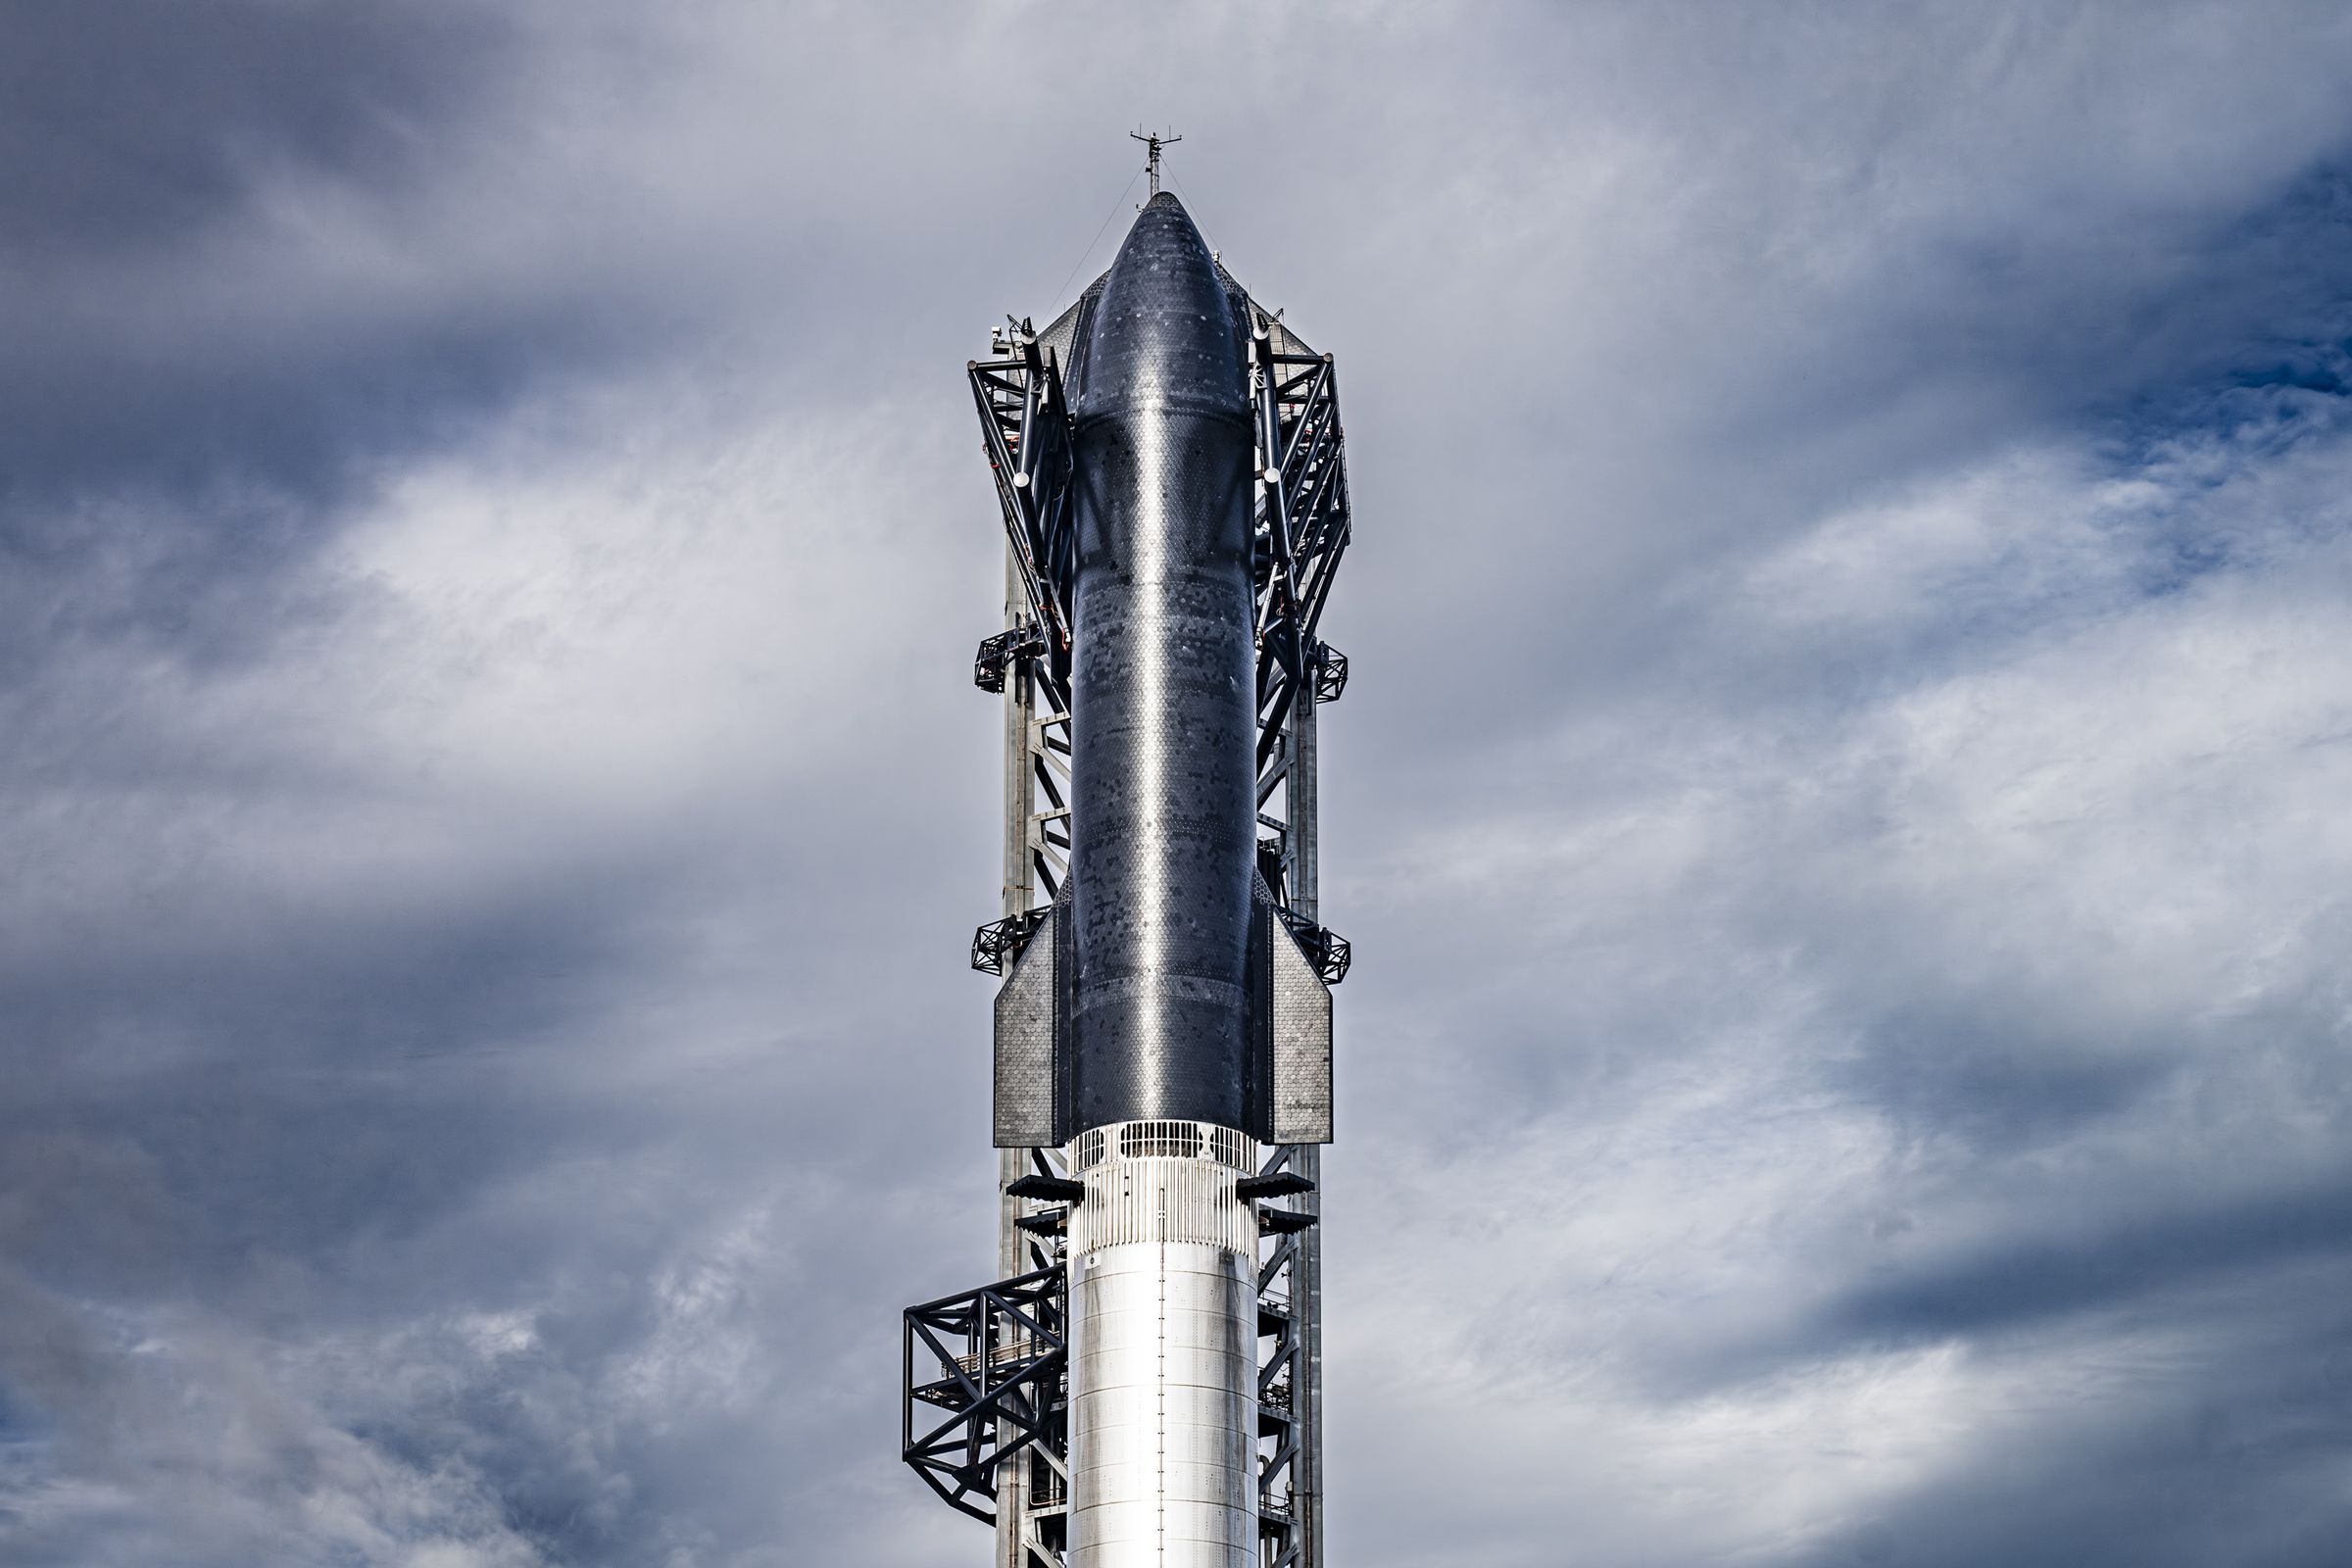 Image of the Starship prototype in position for a launch attempt against a background of a cloudy blue sky.